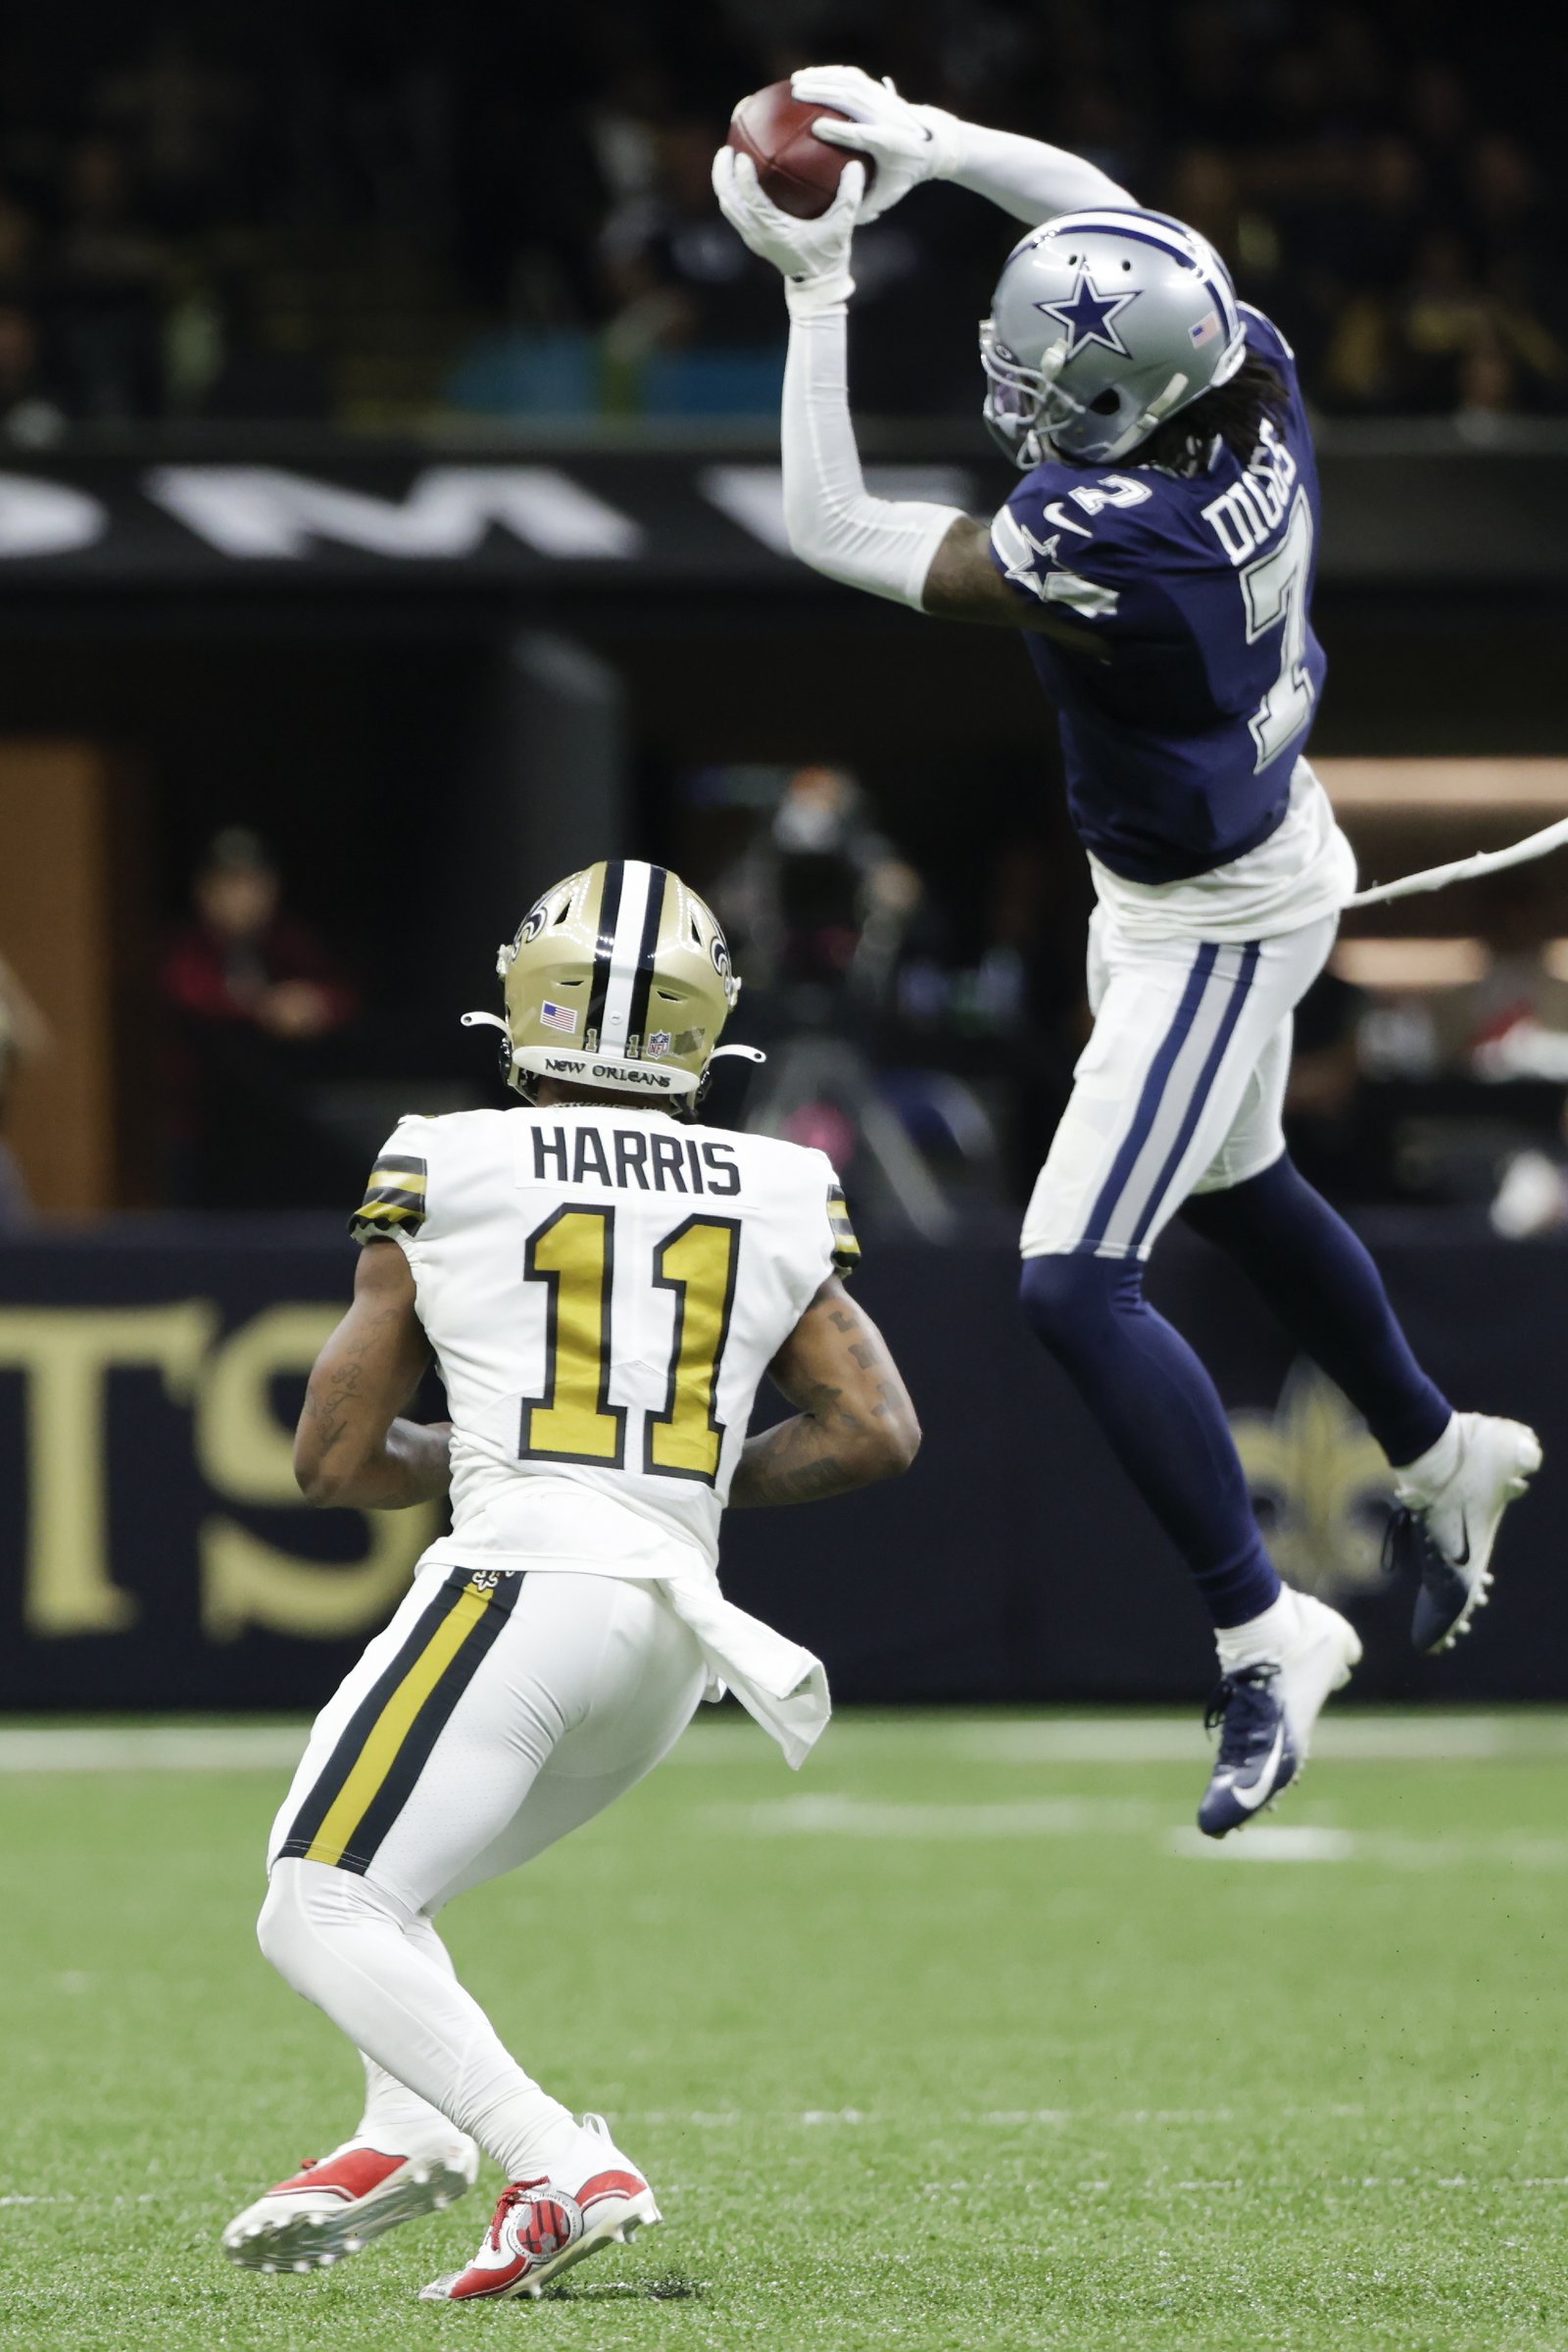 Timely turnovers: Four INTs put Dallas back on track